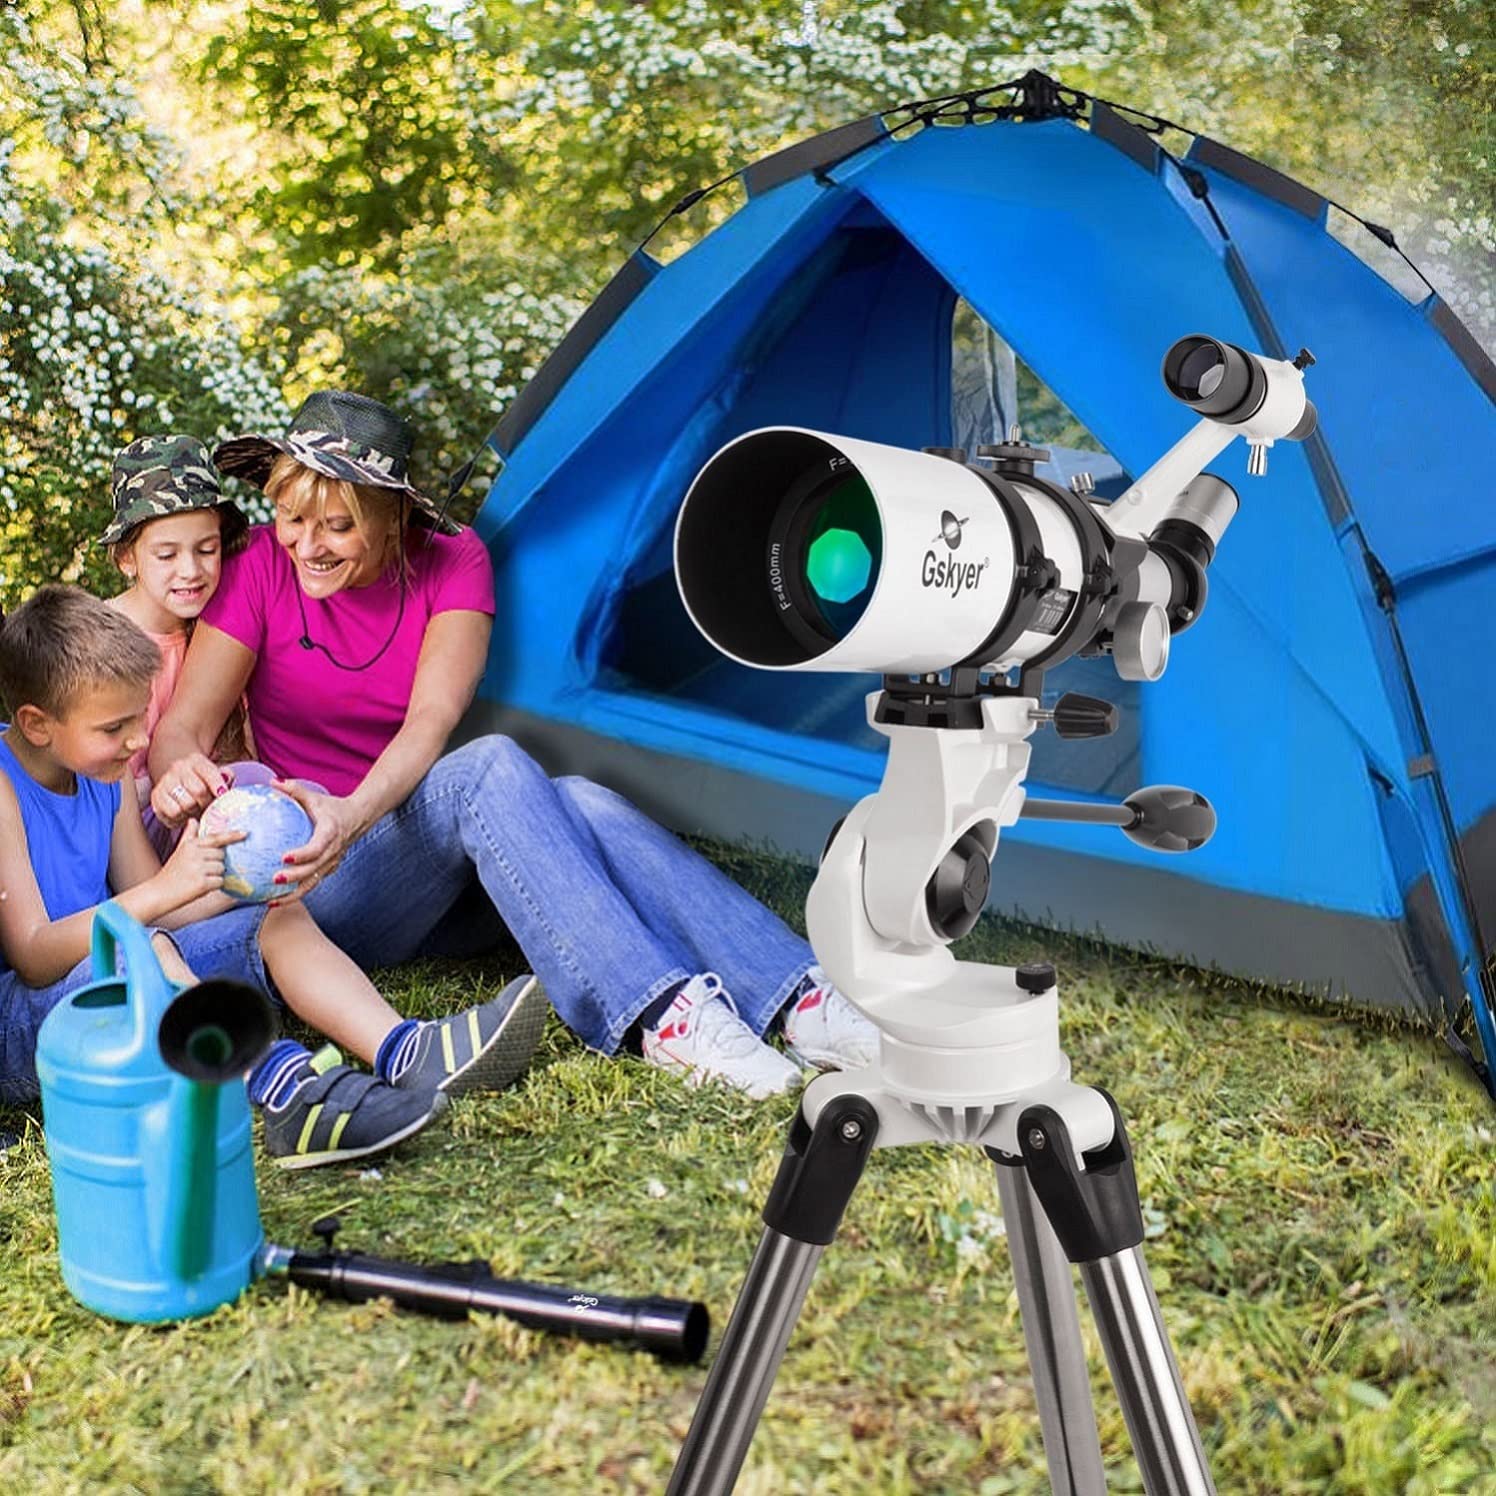 A Gskyer 80mm refractor telescope along with a family outside next to a blue tent.